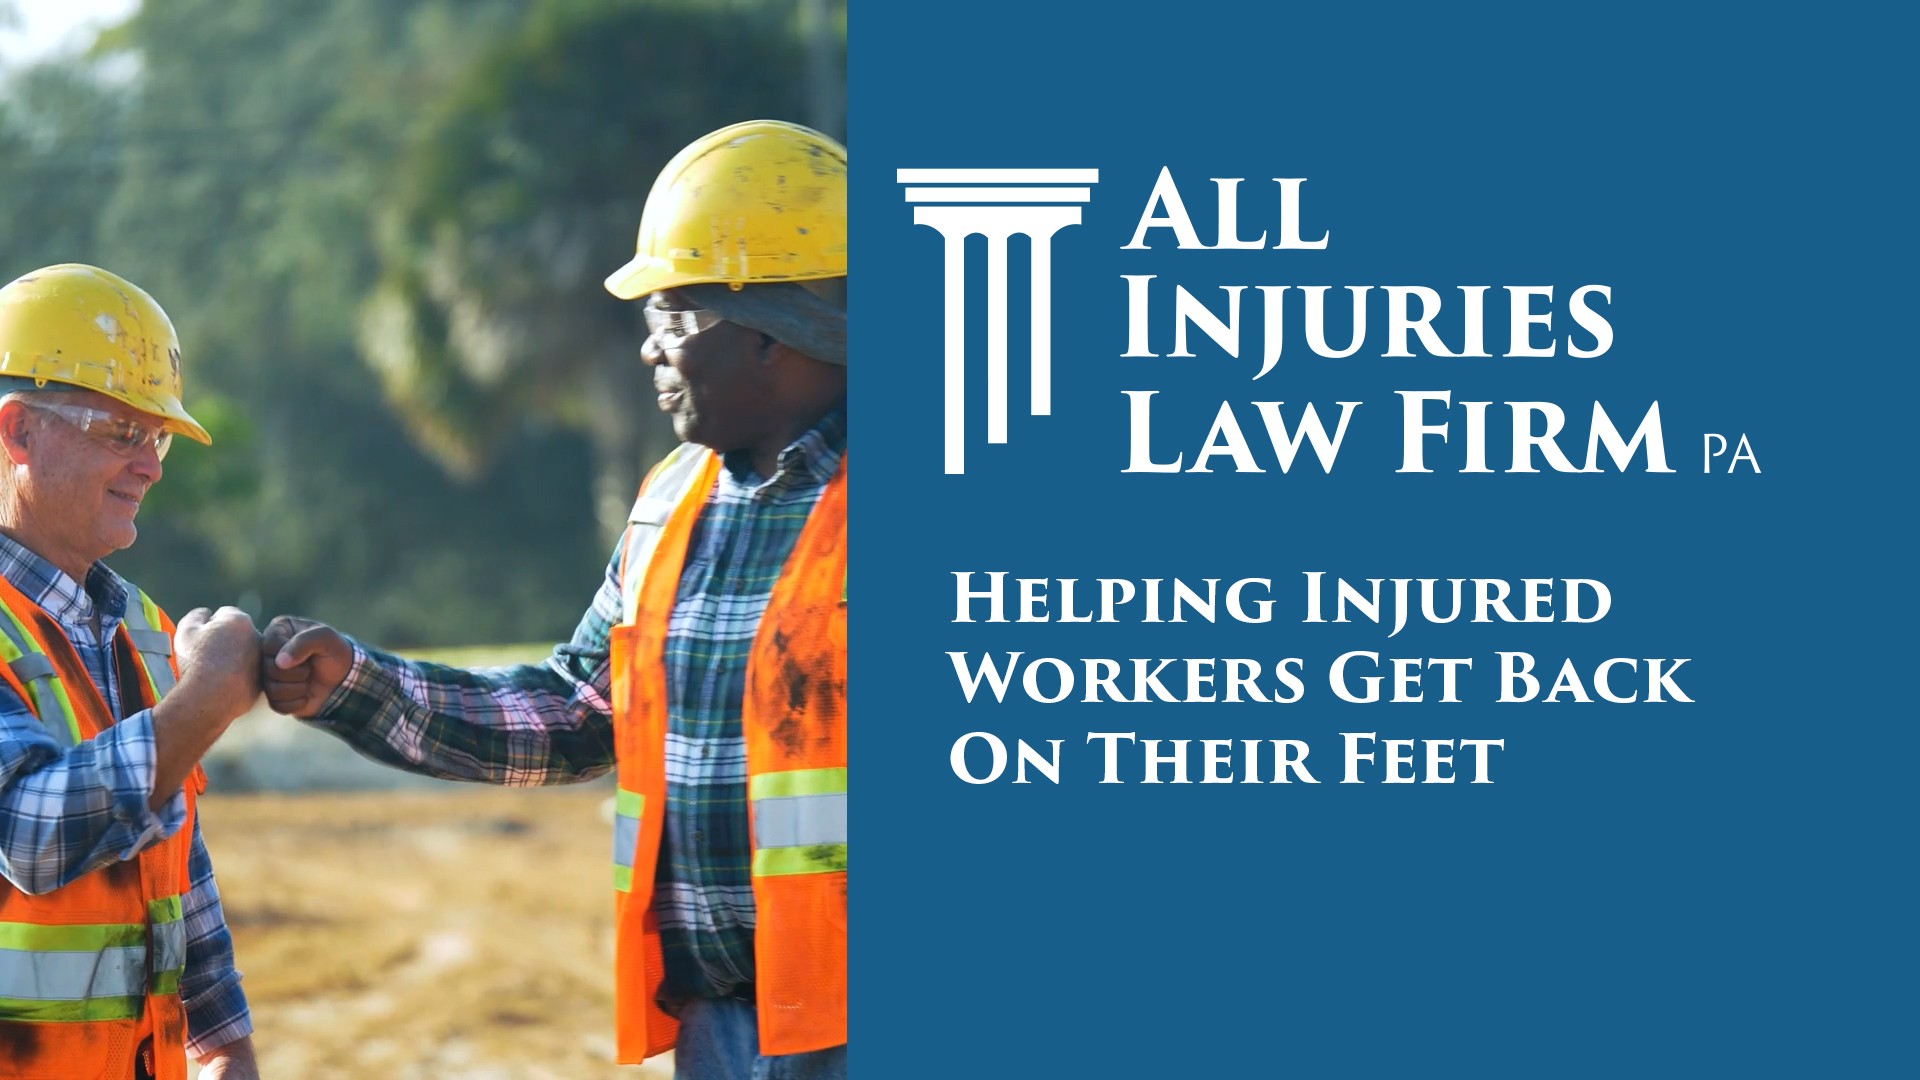 Hurt At Work? All Injuries Law Firm Can Help -  ALl Injuries Law Firm SW Florida